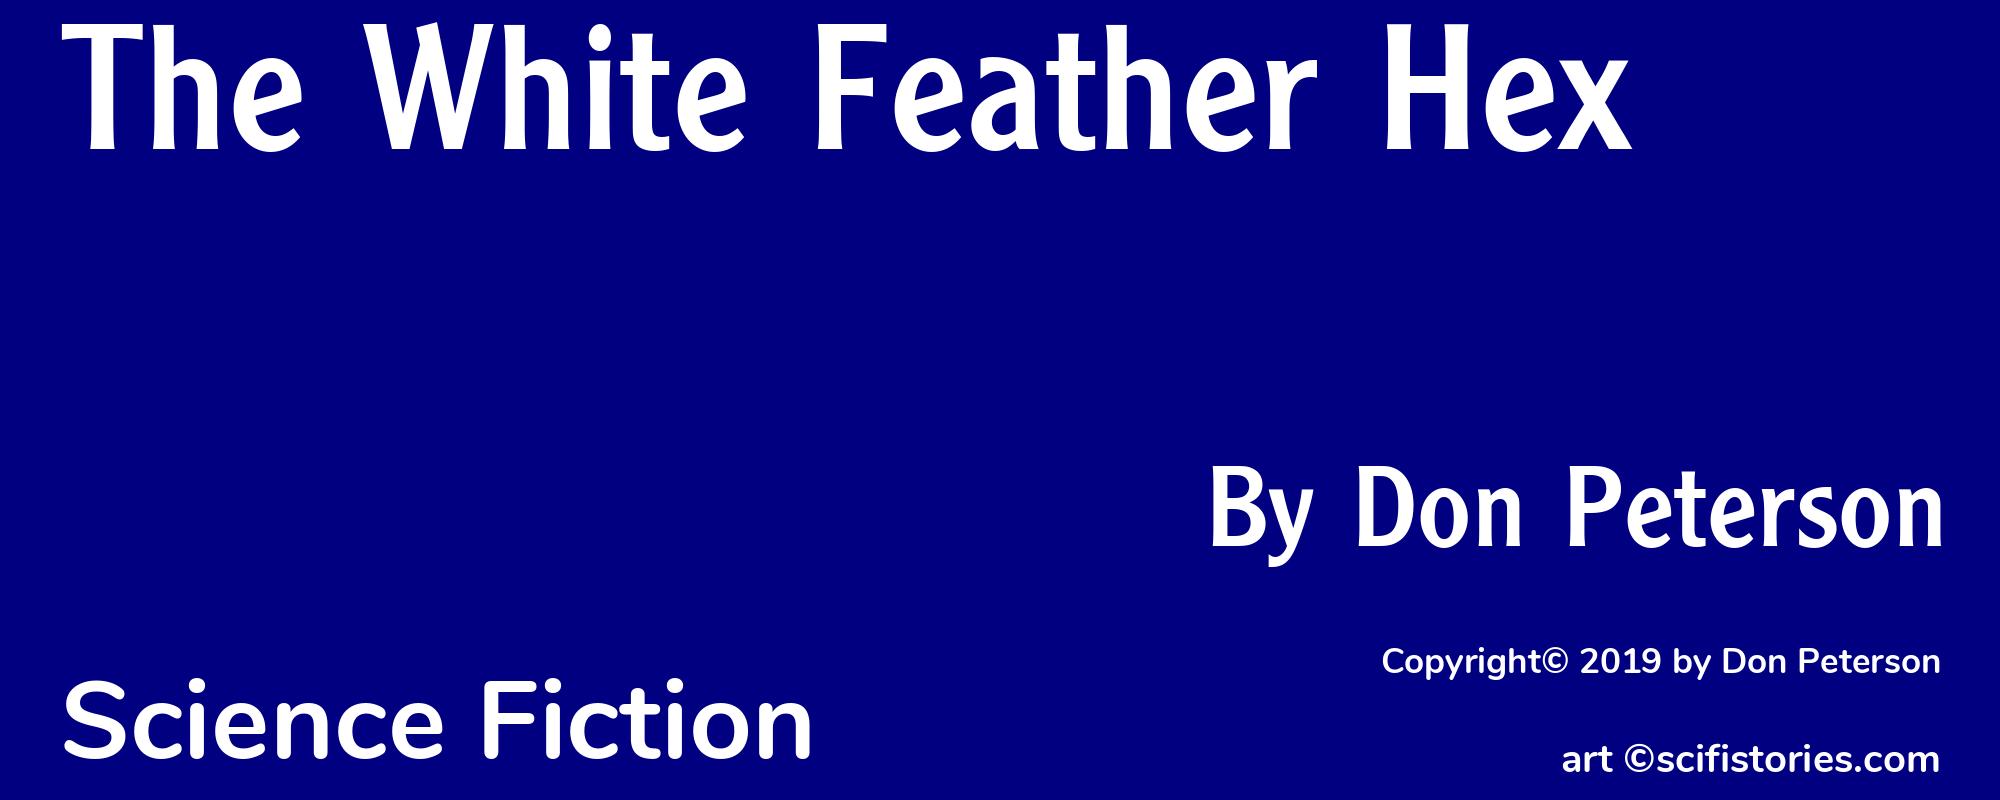 The White Feather Hex - Cover